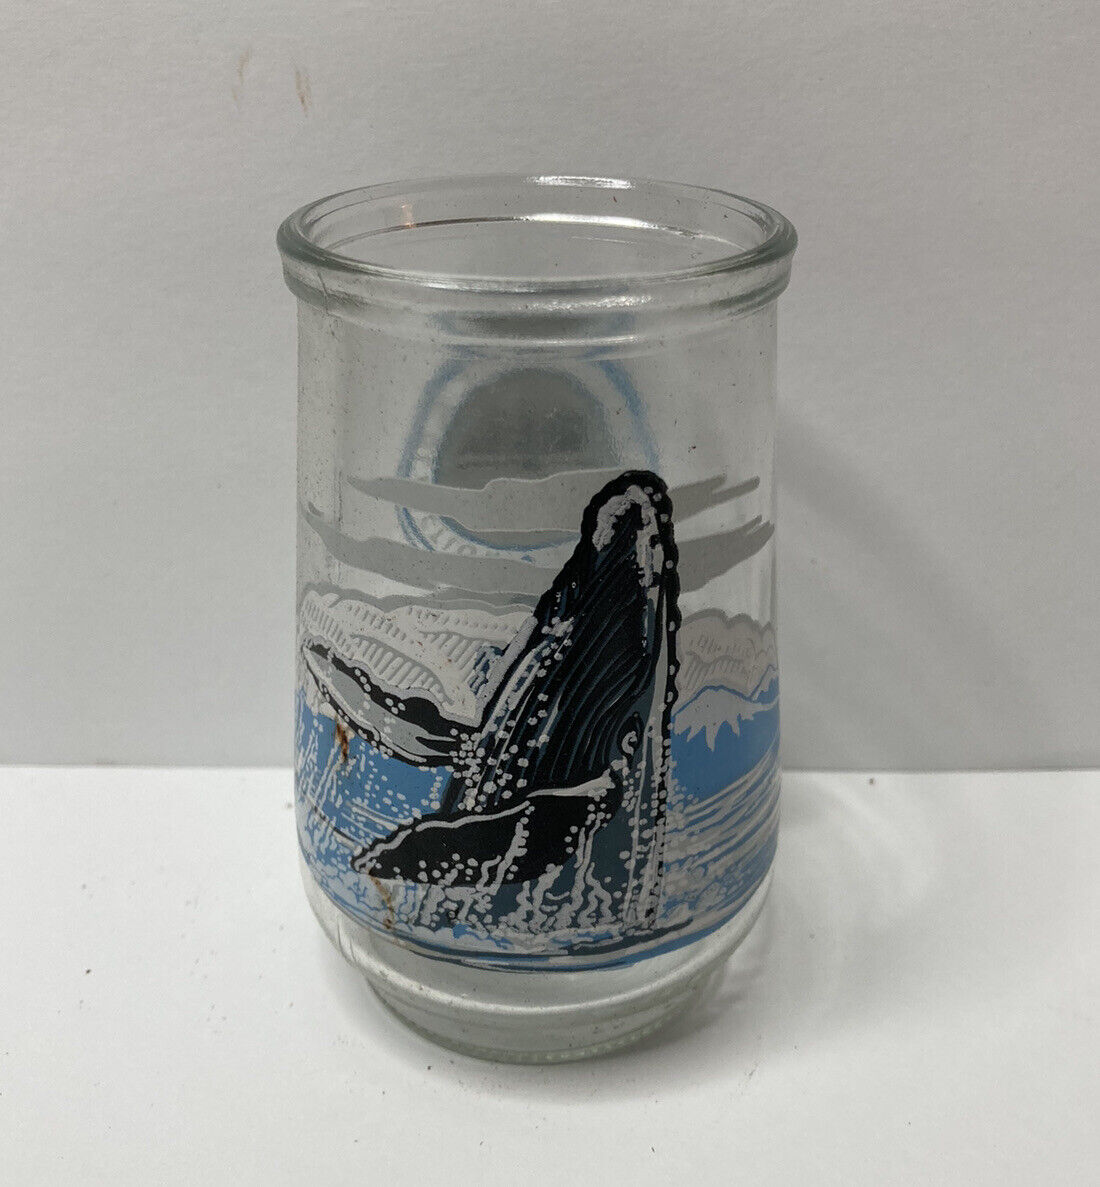 Welch's Jelly Jar Glass Humpback Whale WWF Endangered Species series 6